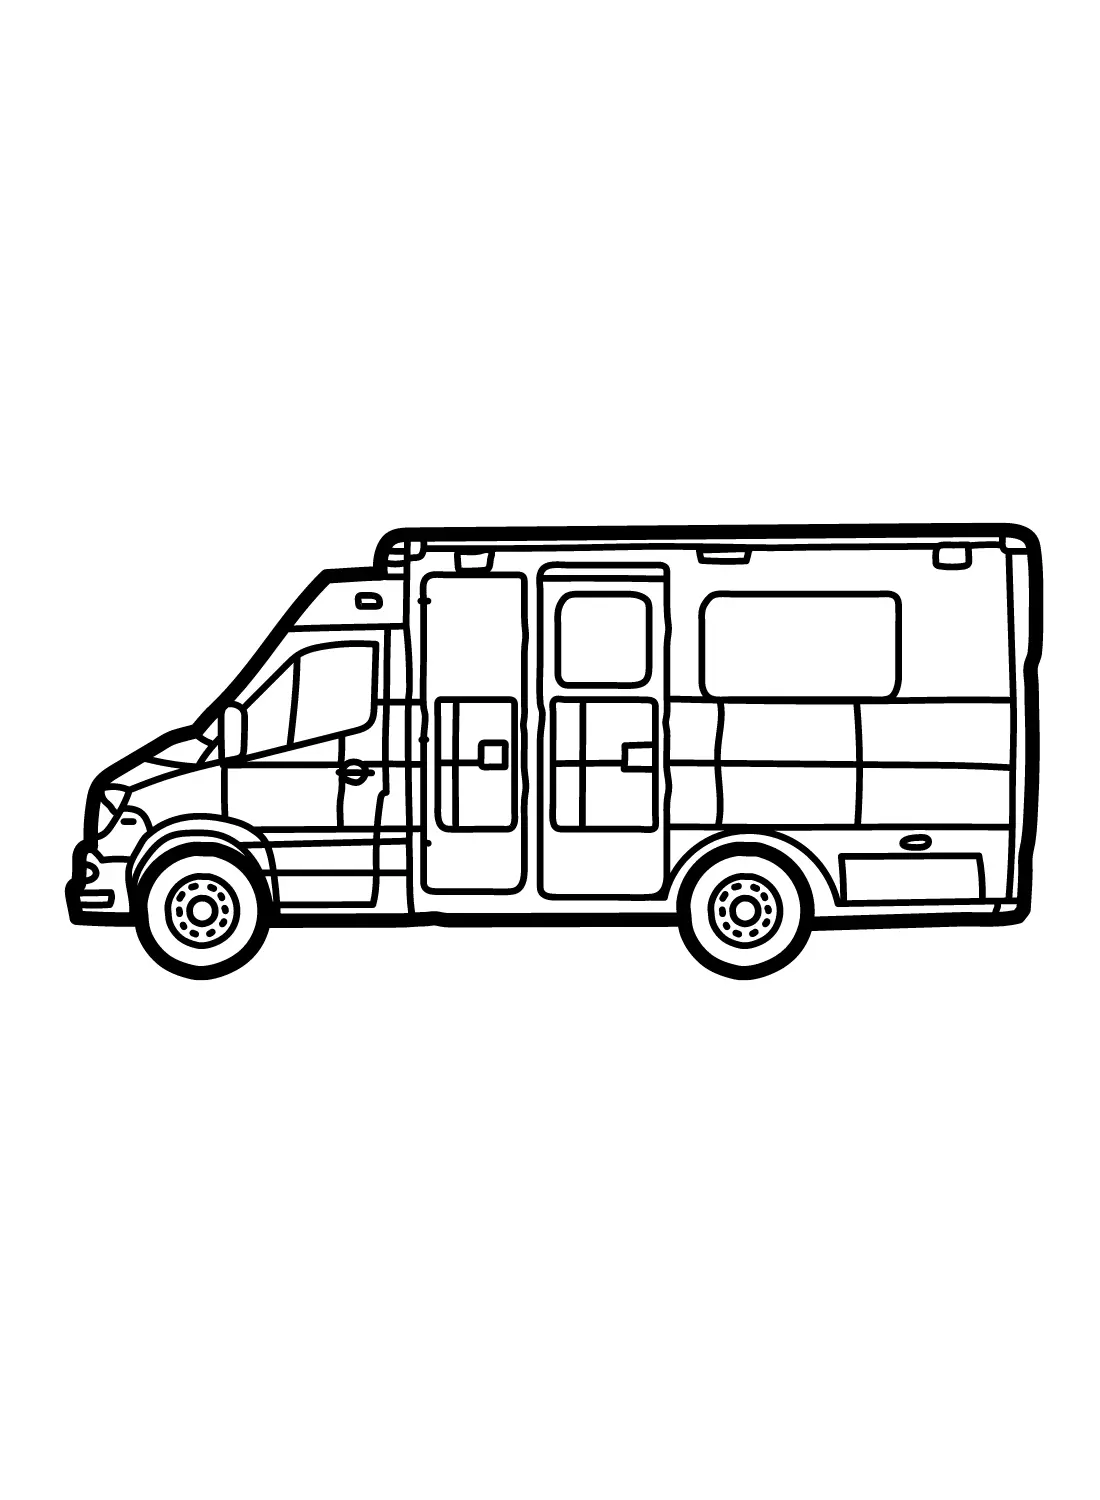 Ambulance Coloring Pages